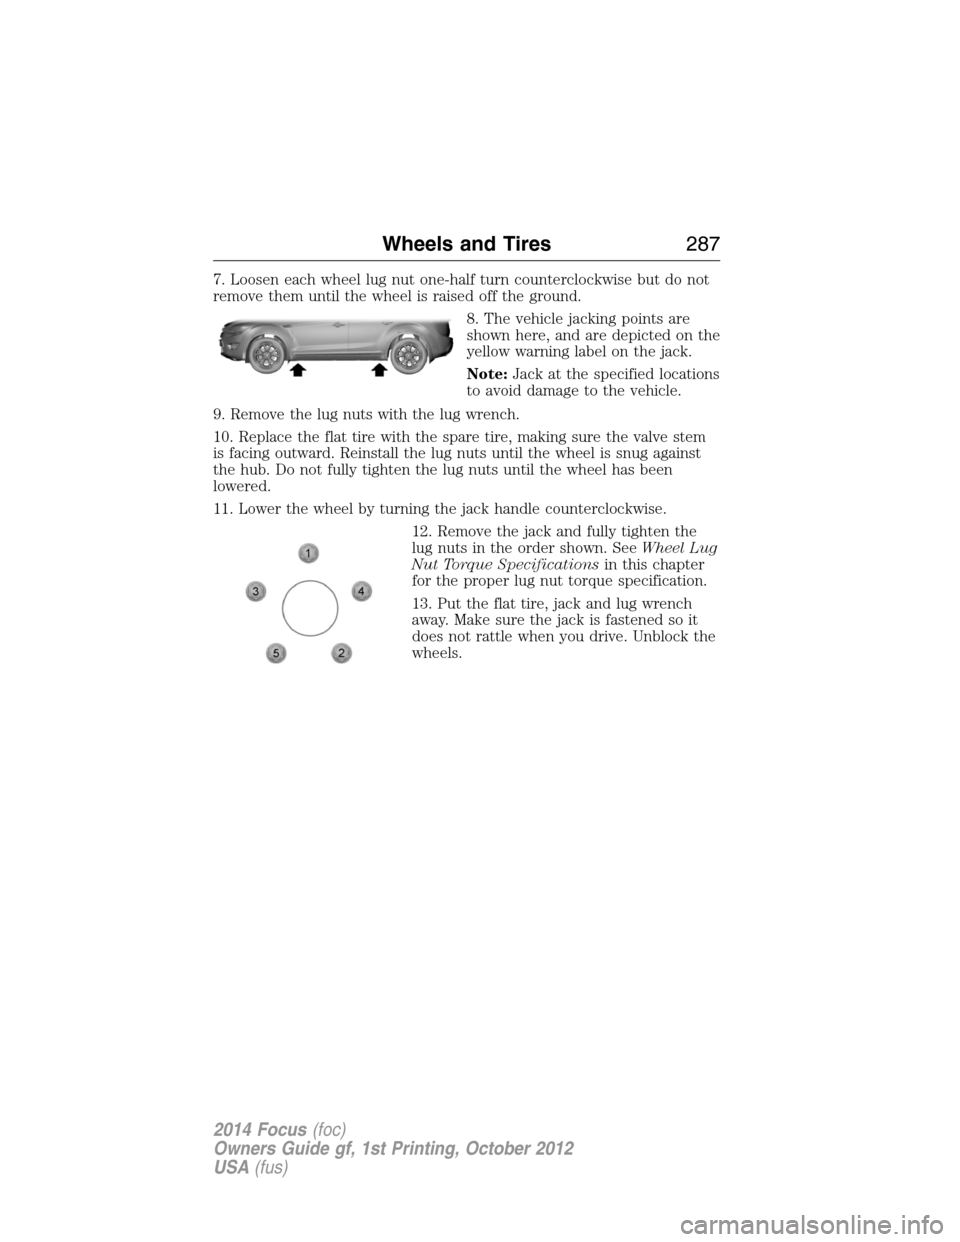 FORD FOCUS 2014 3.G Owners Manual 7. Loosen each wheel lug nut one-half turn counterclockwise but do not
remove them until the wheel is raised off the ground.
8. The vehicle jacking points are
shown here, and are depicted on the
yello